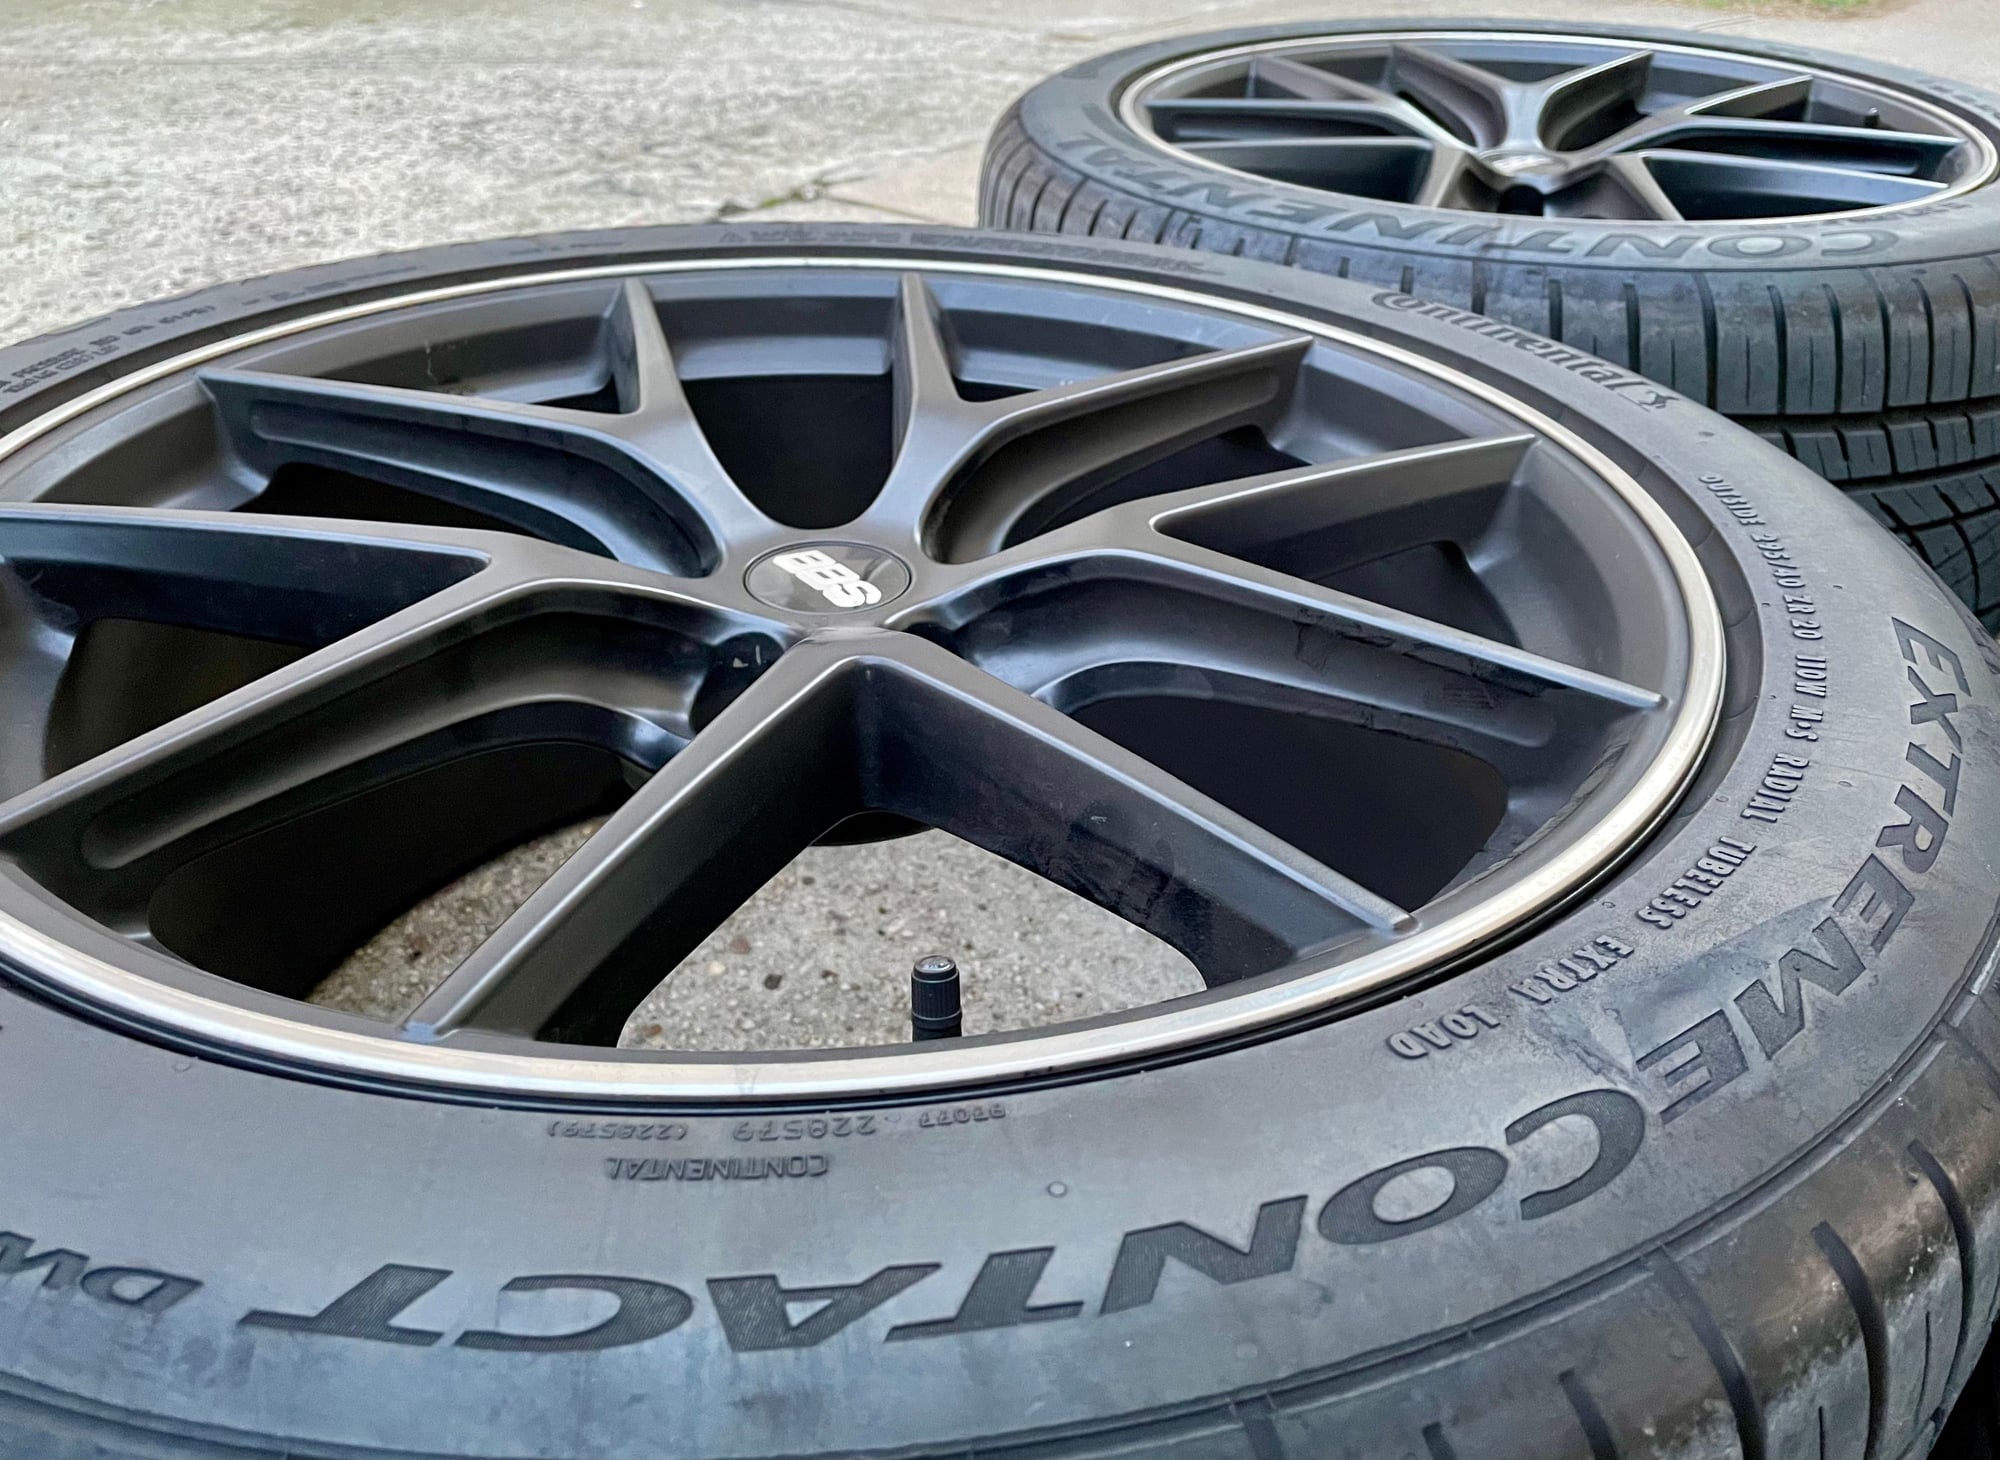 Wheels and Tires/Axles - FS: 20” BBS CI-R Wheels - Used - 0  All Models - New York, NY 11220, United States